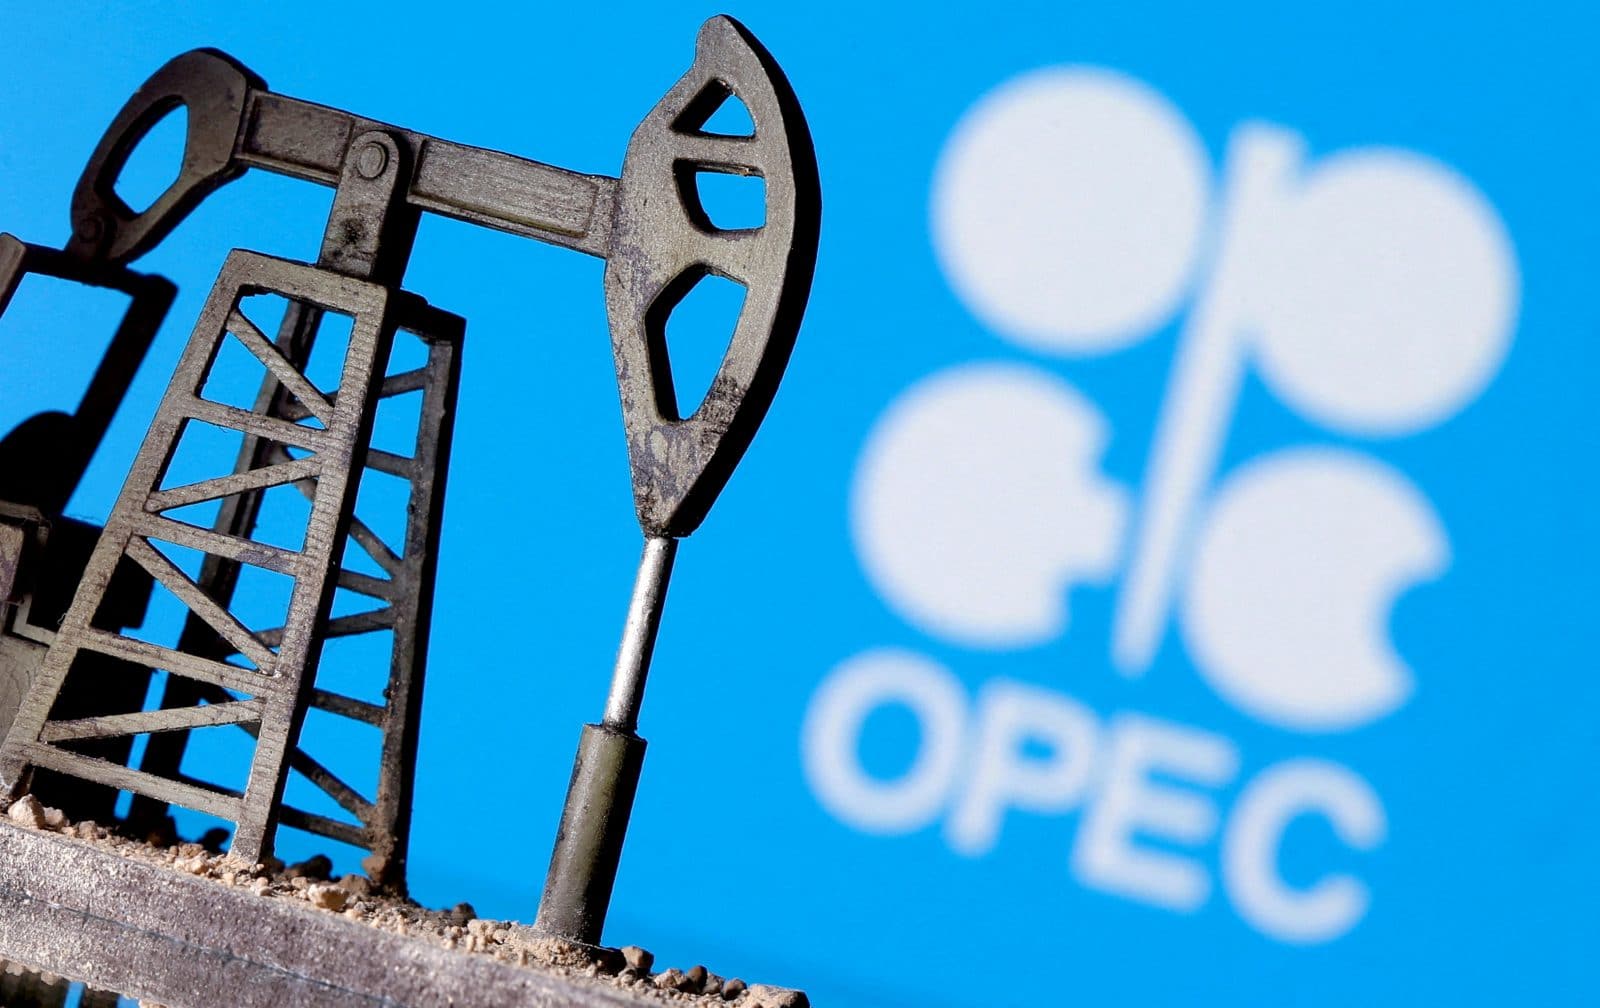 OPEC may exclude Russia from the oil-production deal